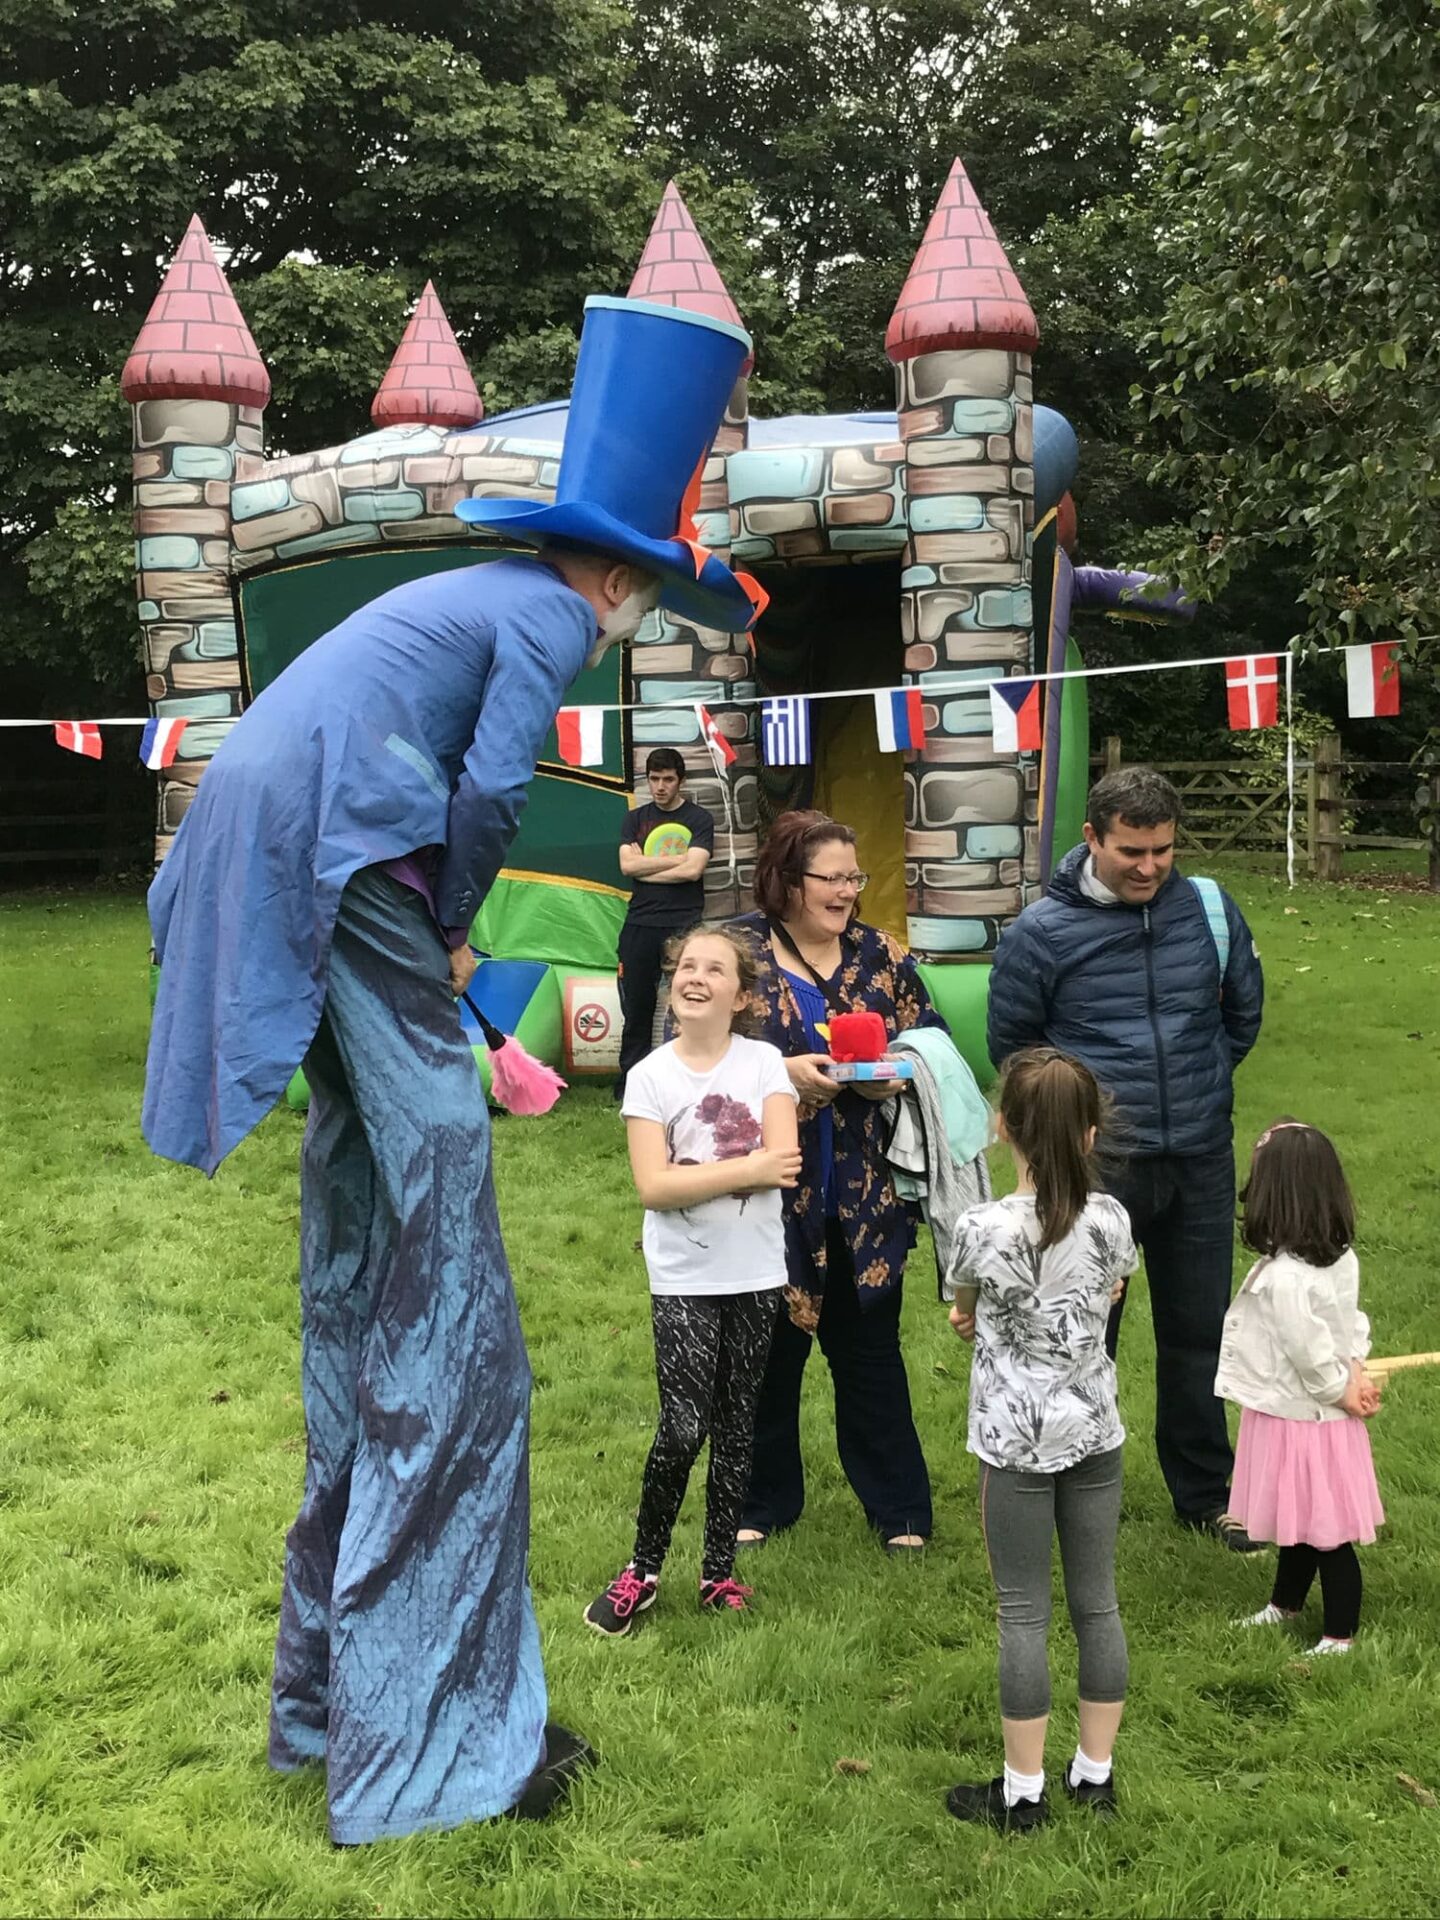 A family at a "family fun day" summer party is entertained by a stilt walker man in a blue top hat and fancy dress. There is an inflatable bouncy castle in the background